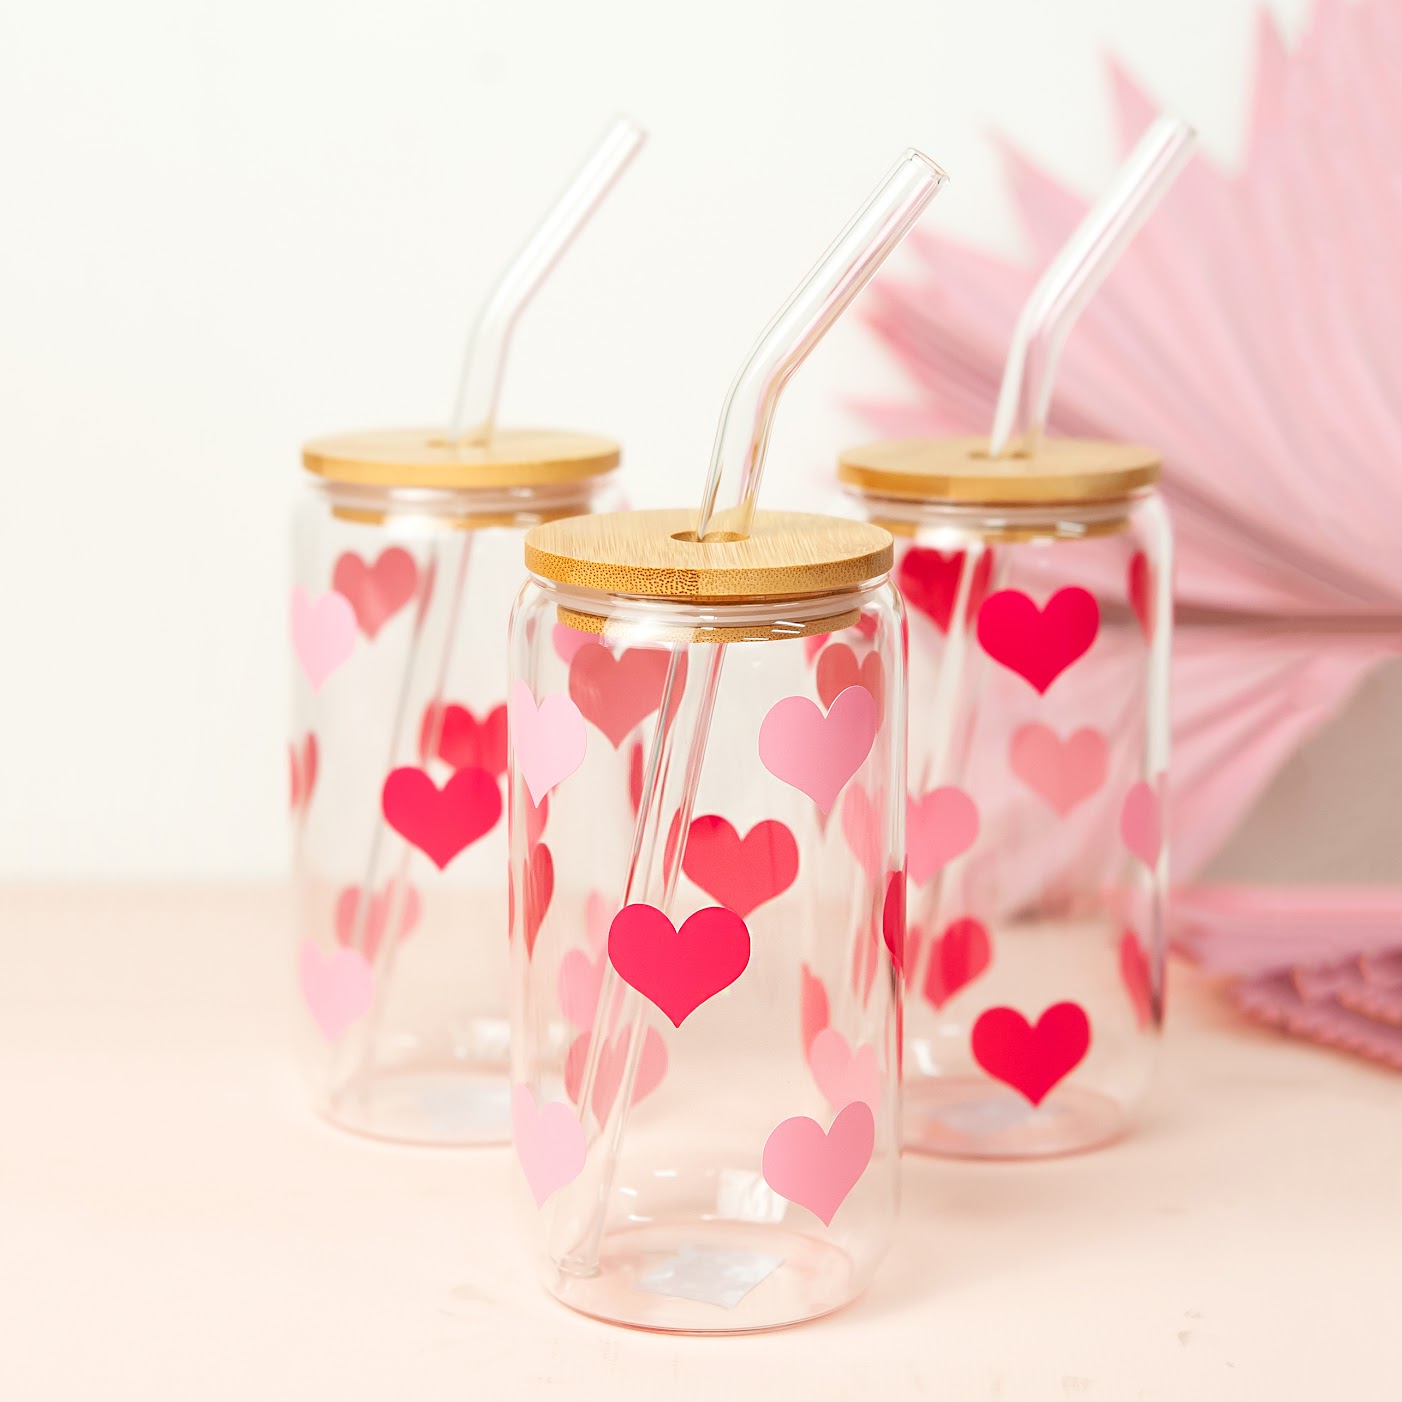 Adorable glass tumbler decorated with pink and red heart designs, featuring a bamboo lid and glass straw, ideal for Valentine's Day or everyday use